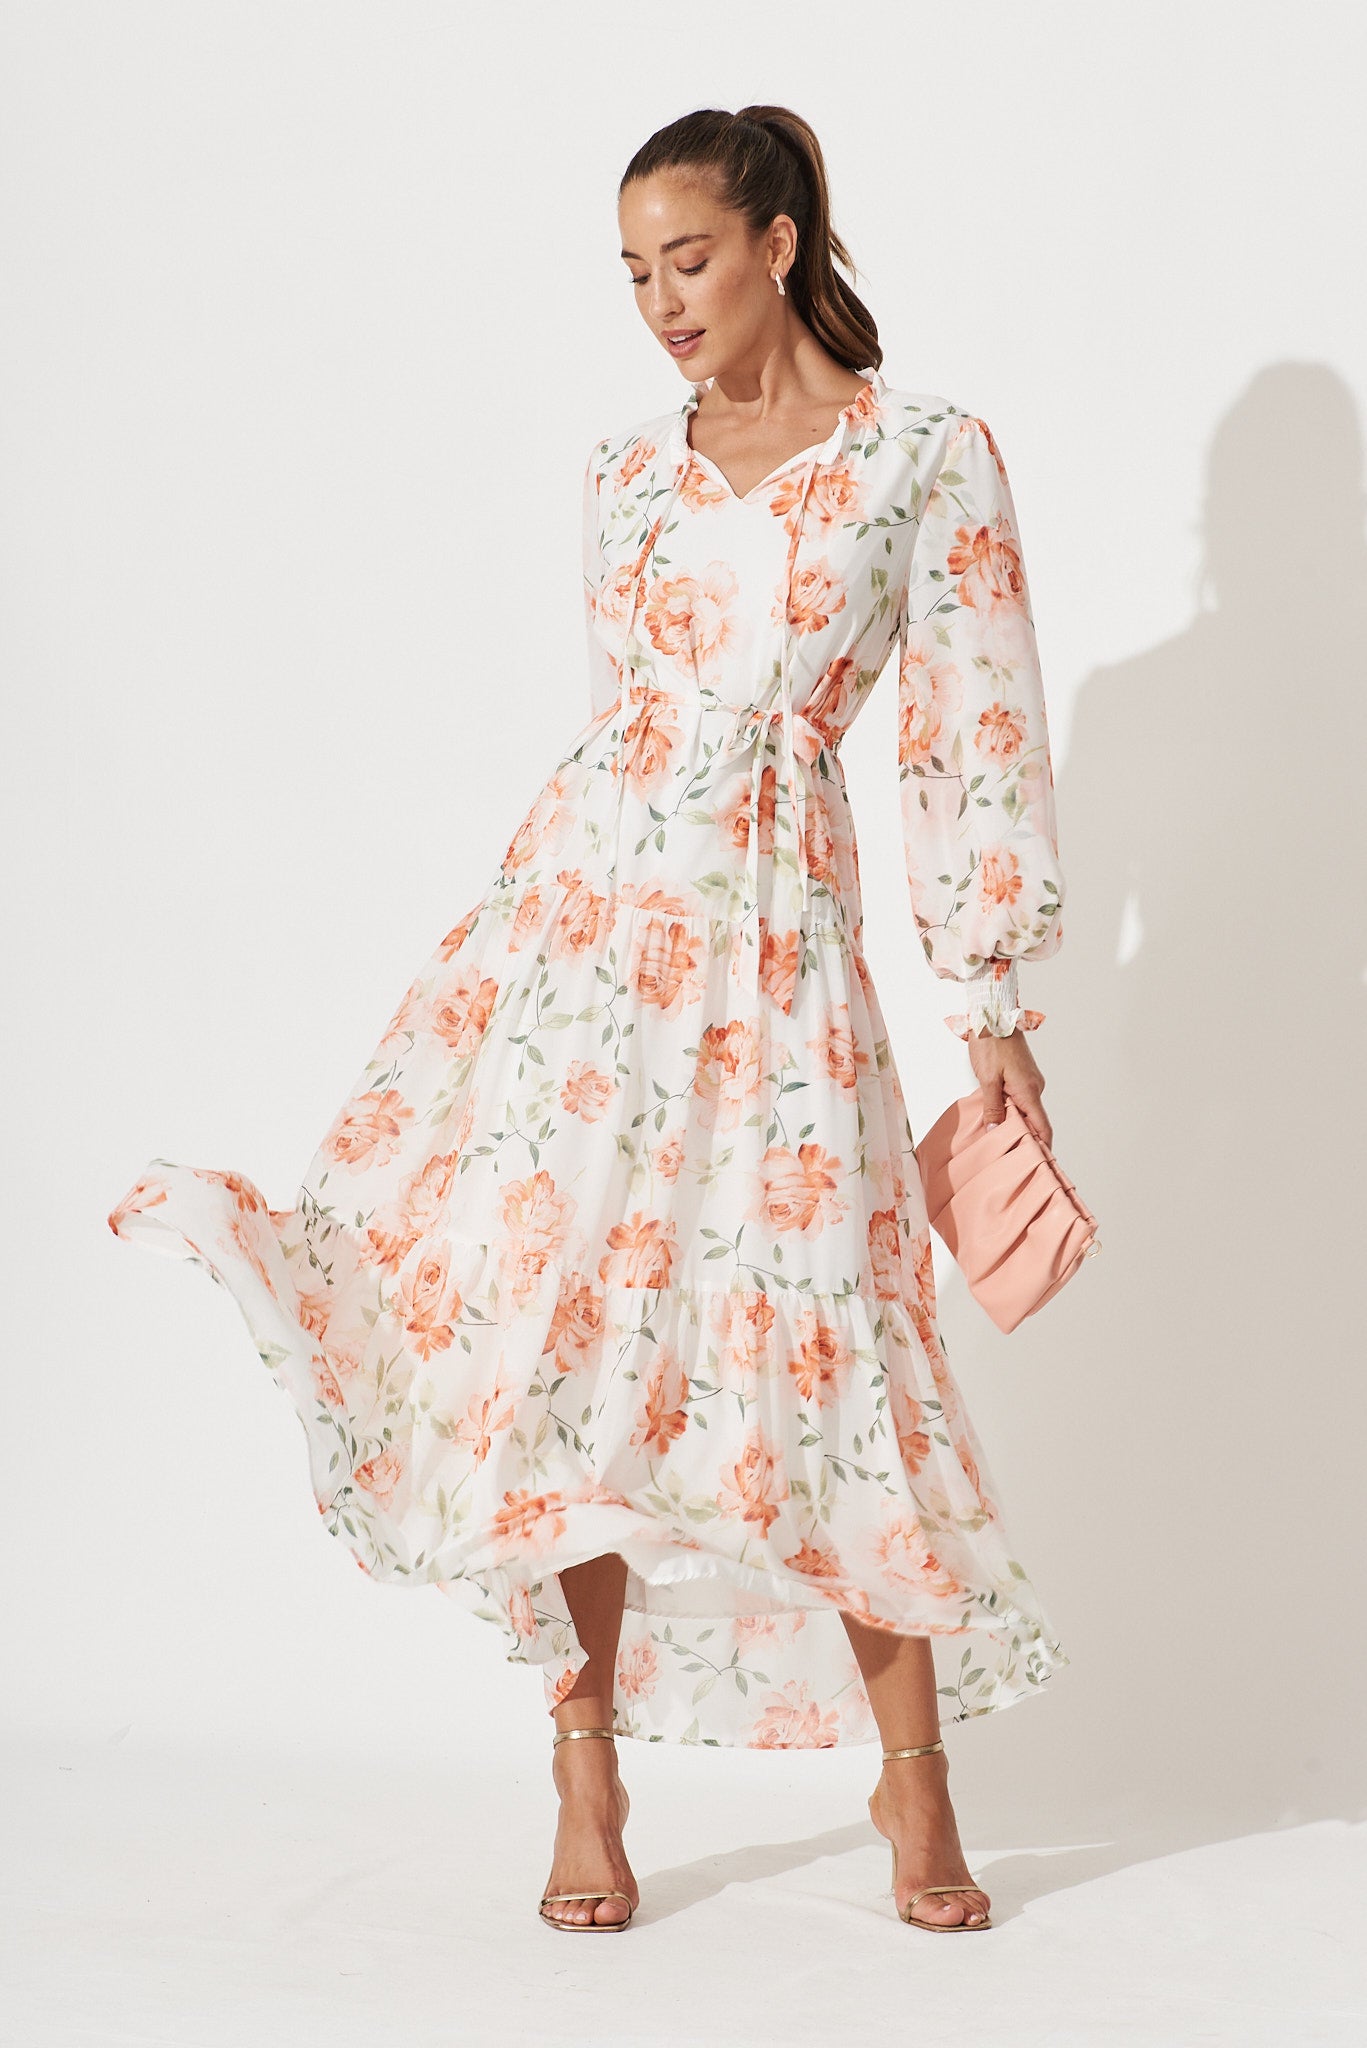 Beauty Point Maxi Smock Dress In White With Peach Floral Chiffon - full length